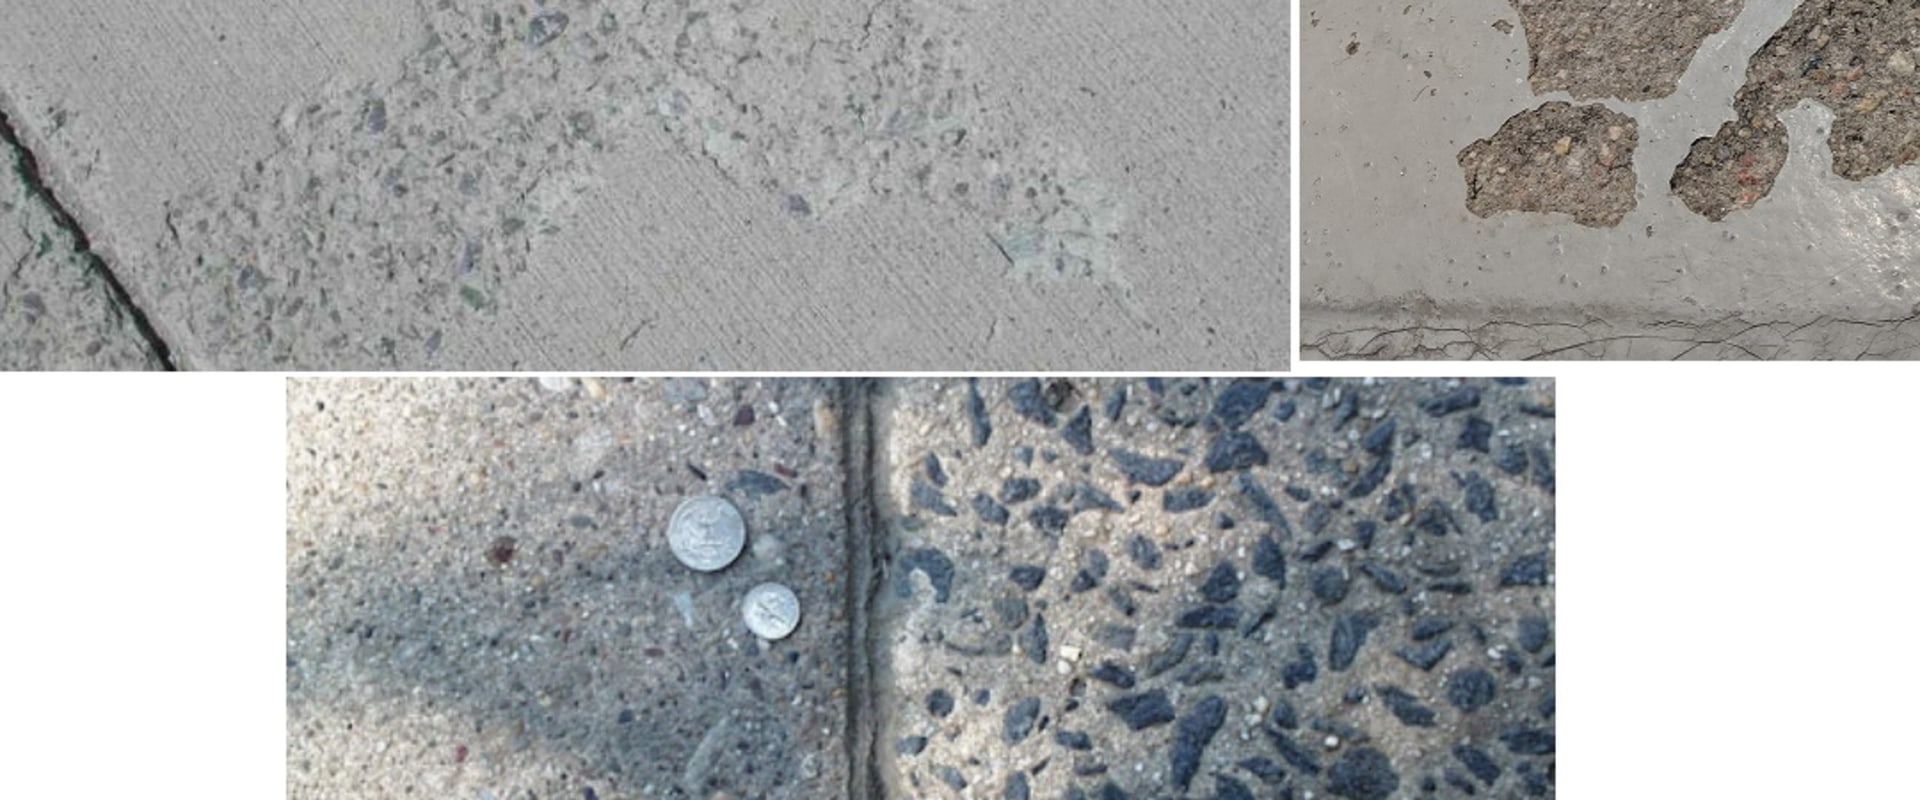 Why Does Concrete Peeling Occur?